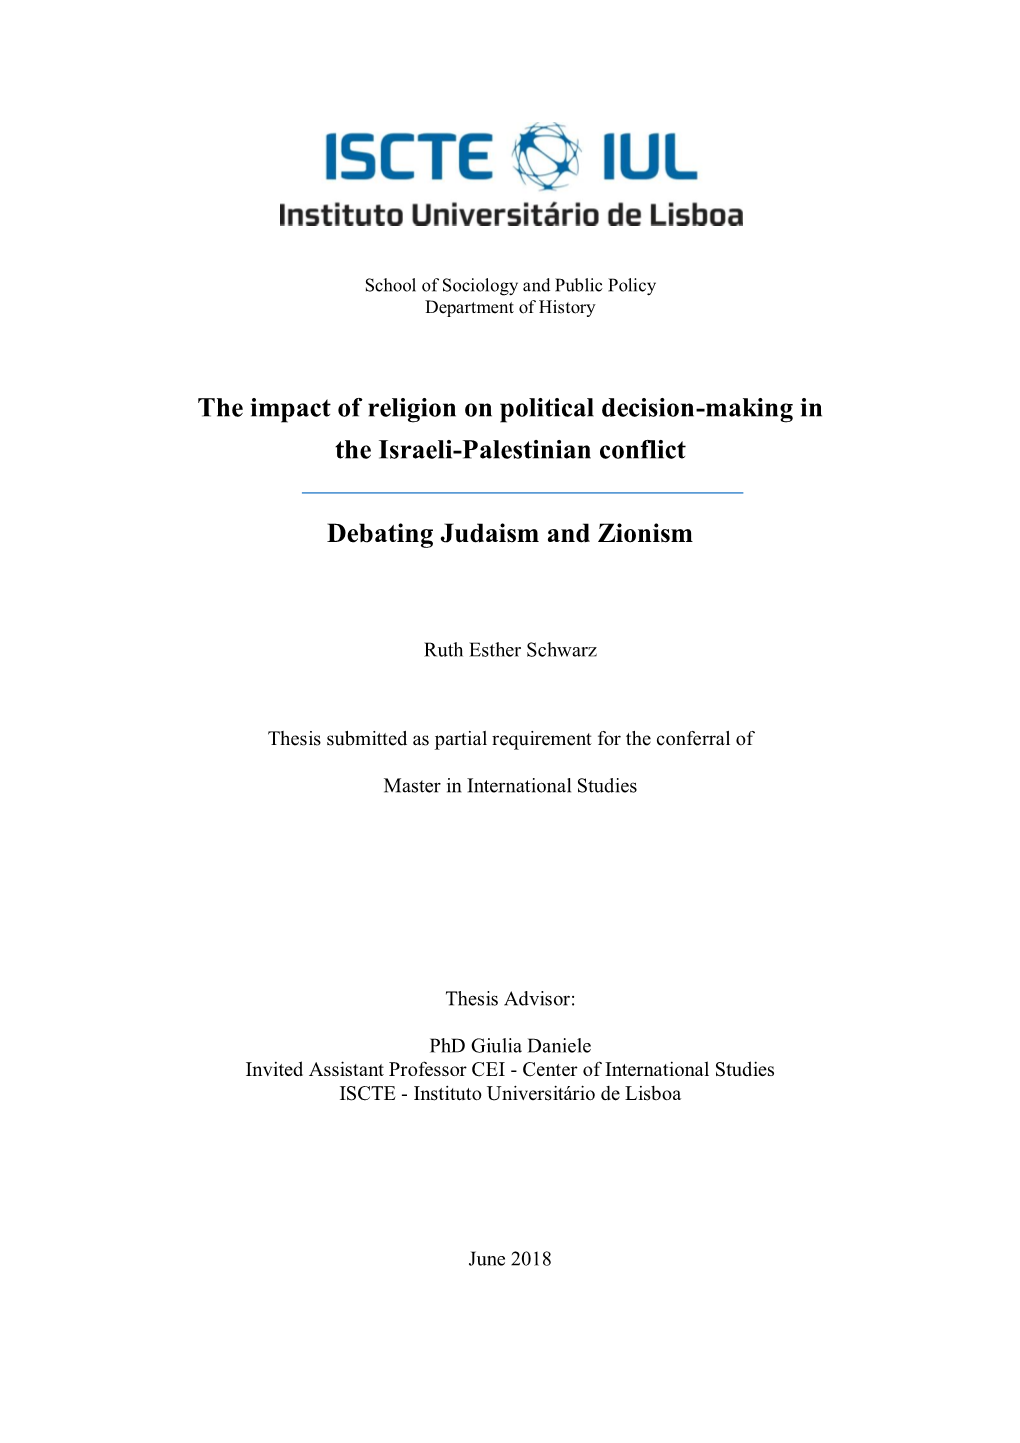 The Impact of Religion on Political Decision-Making in the Israeli-Palestinian Conflict